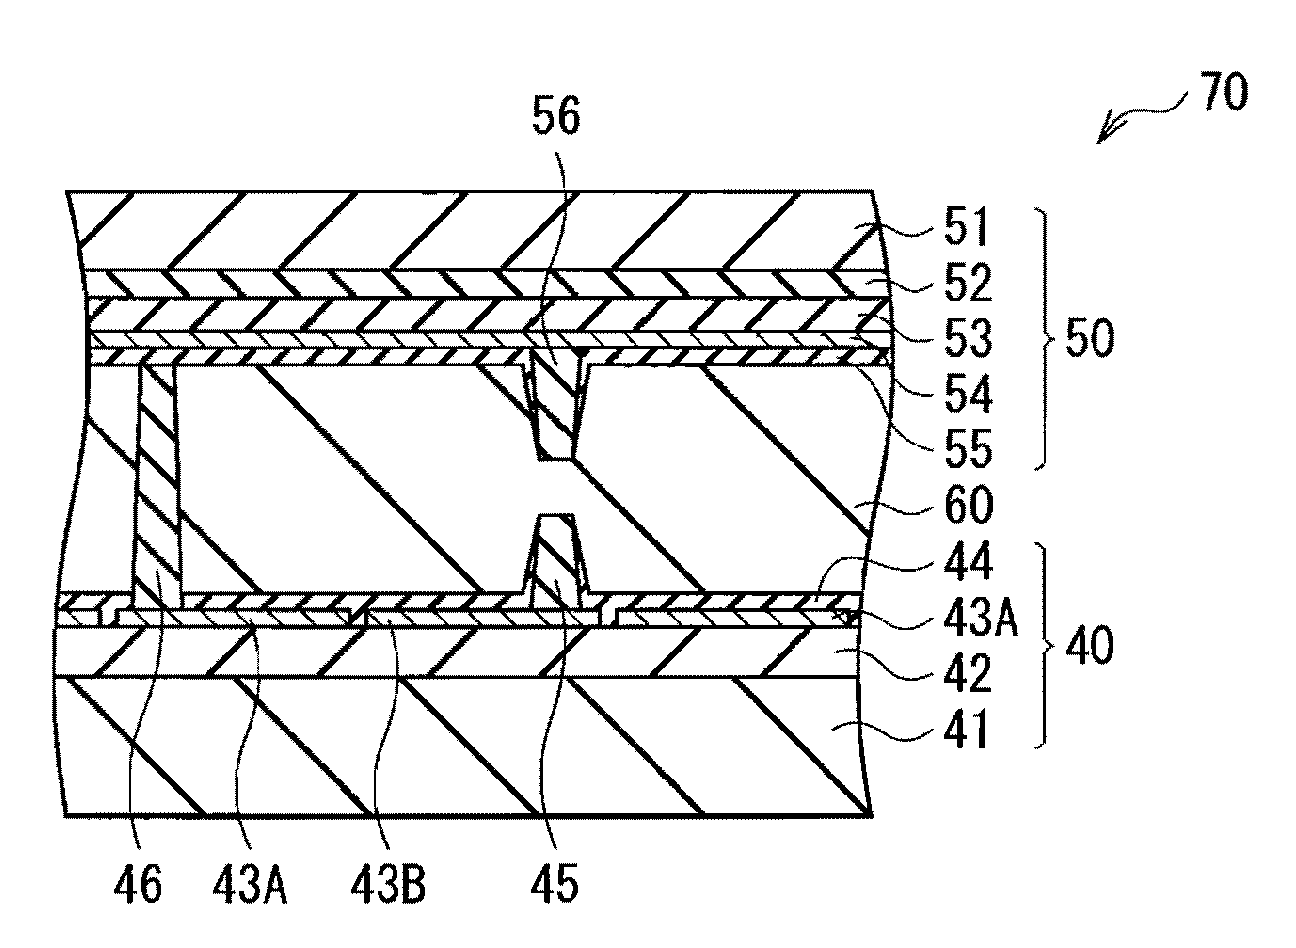 Liquid crystal panel including pairs of pillar structures, and liquid crystal display device including the liquid crystal panel